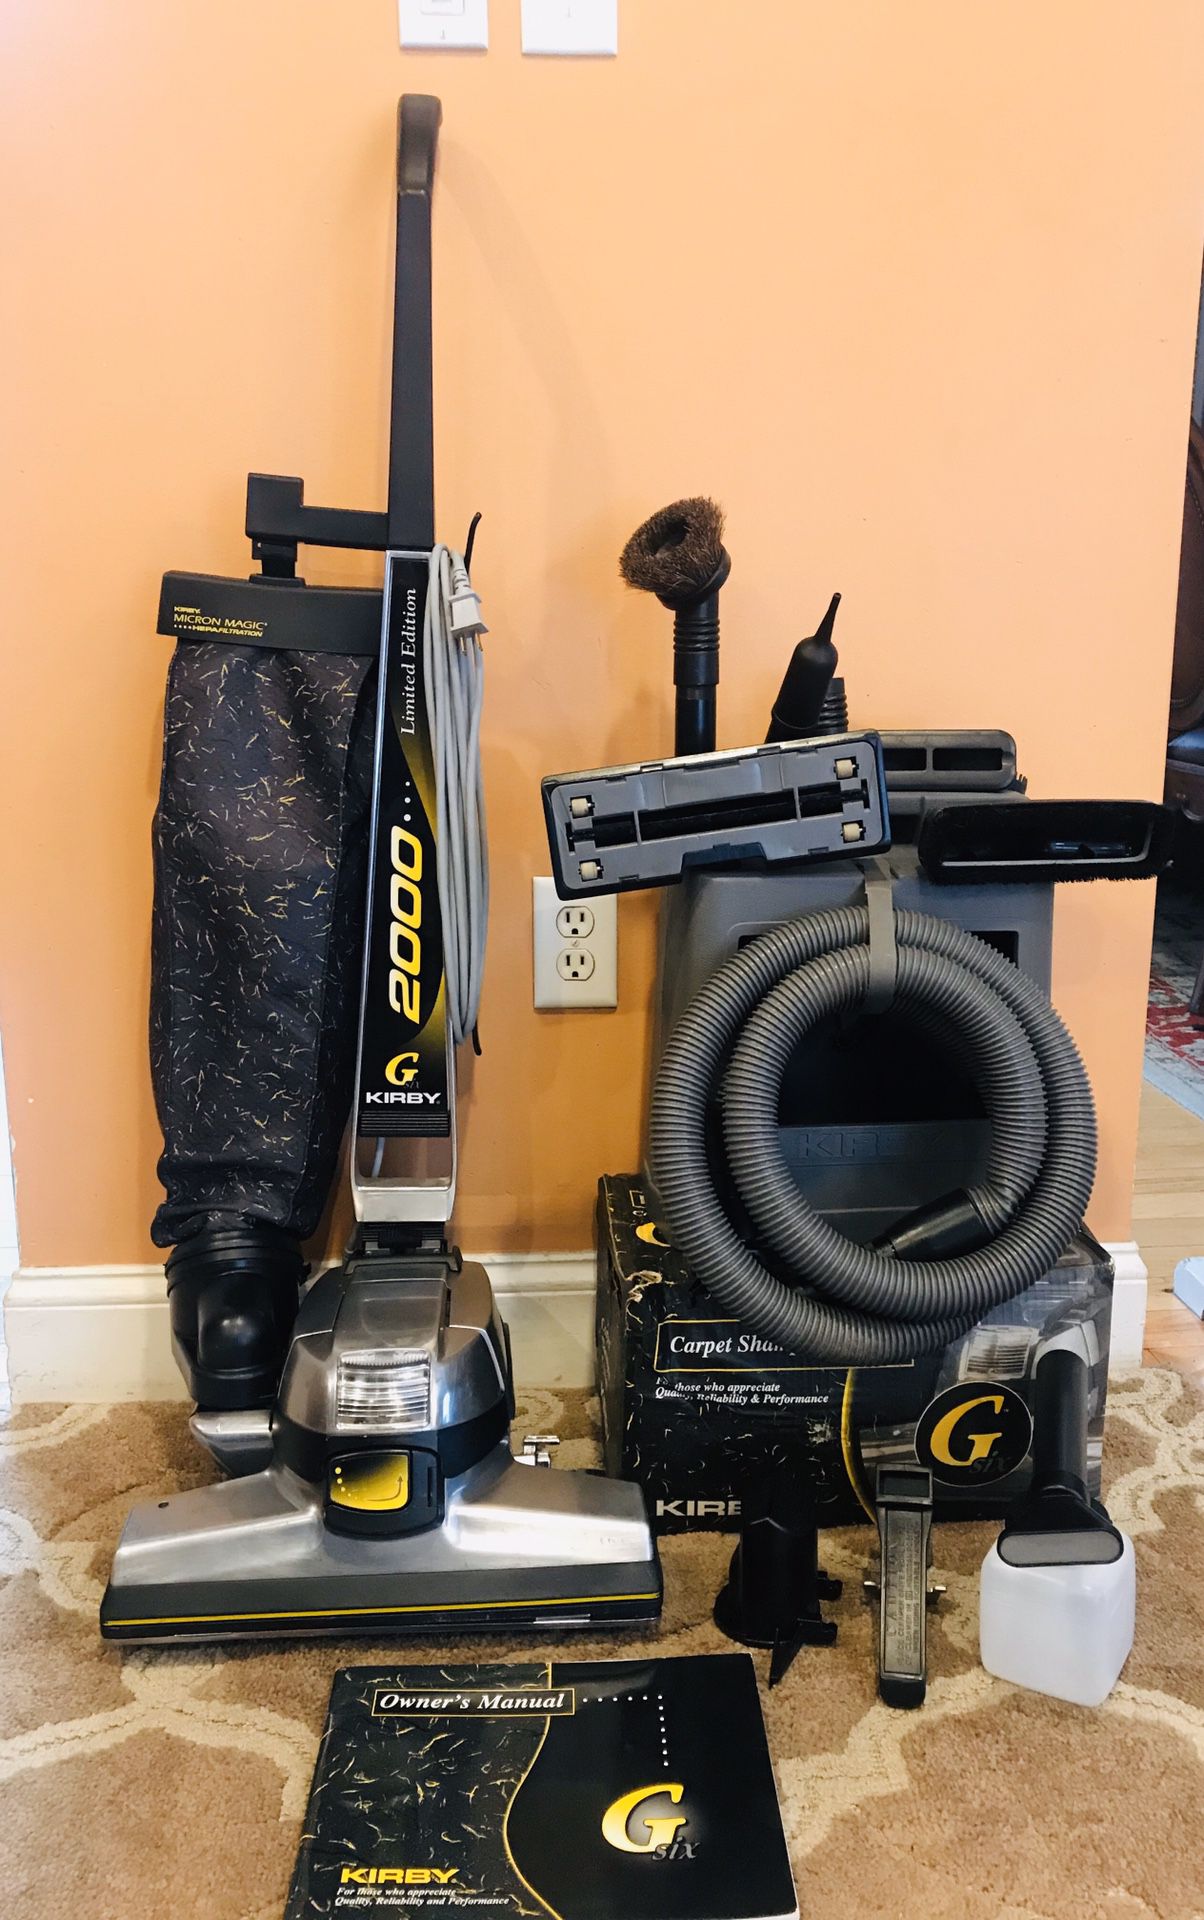 Kirby G 6 Vacuum Cleaner W/Attachments & Shampooer